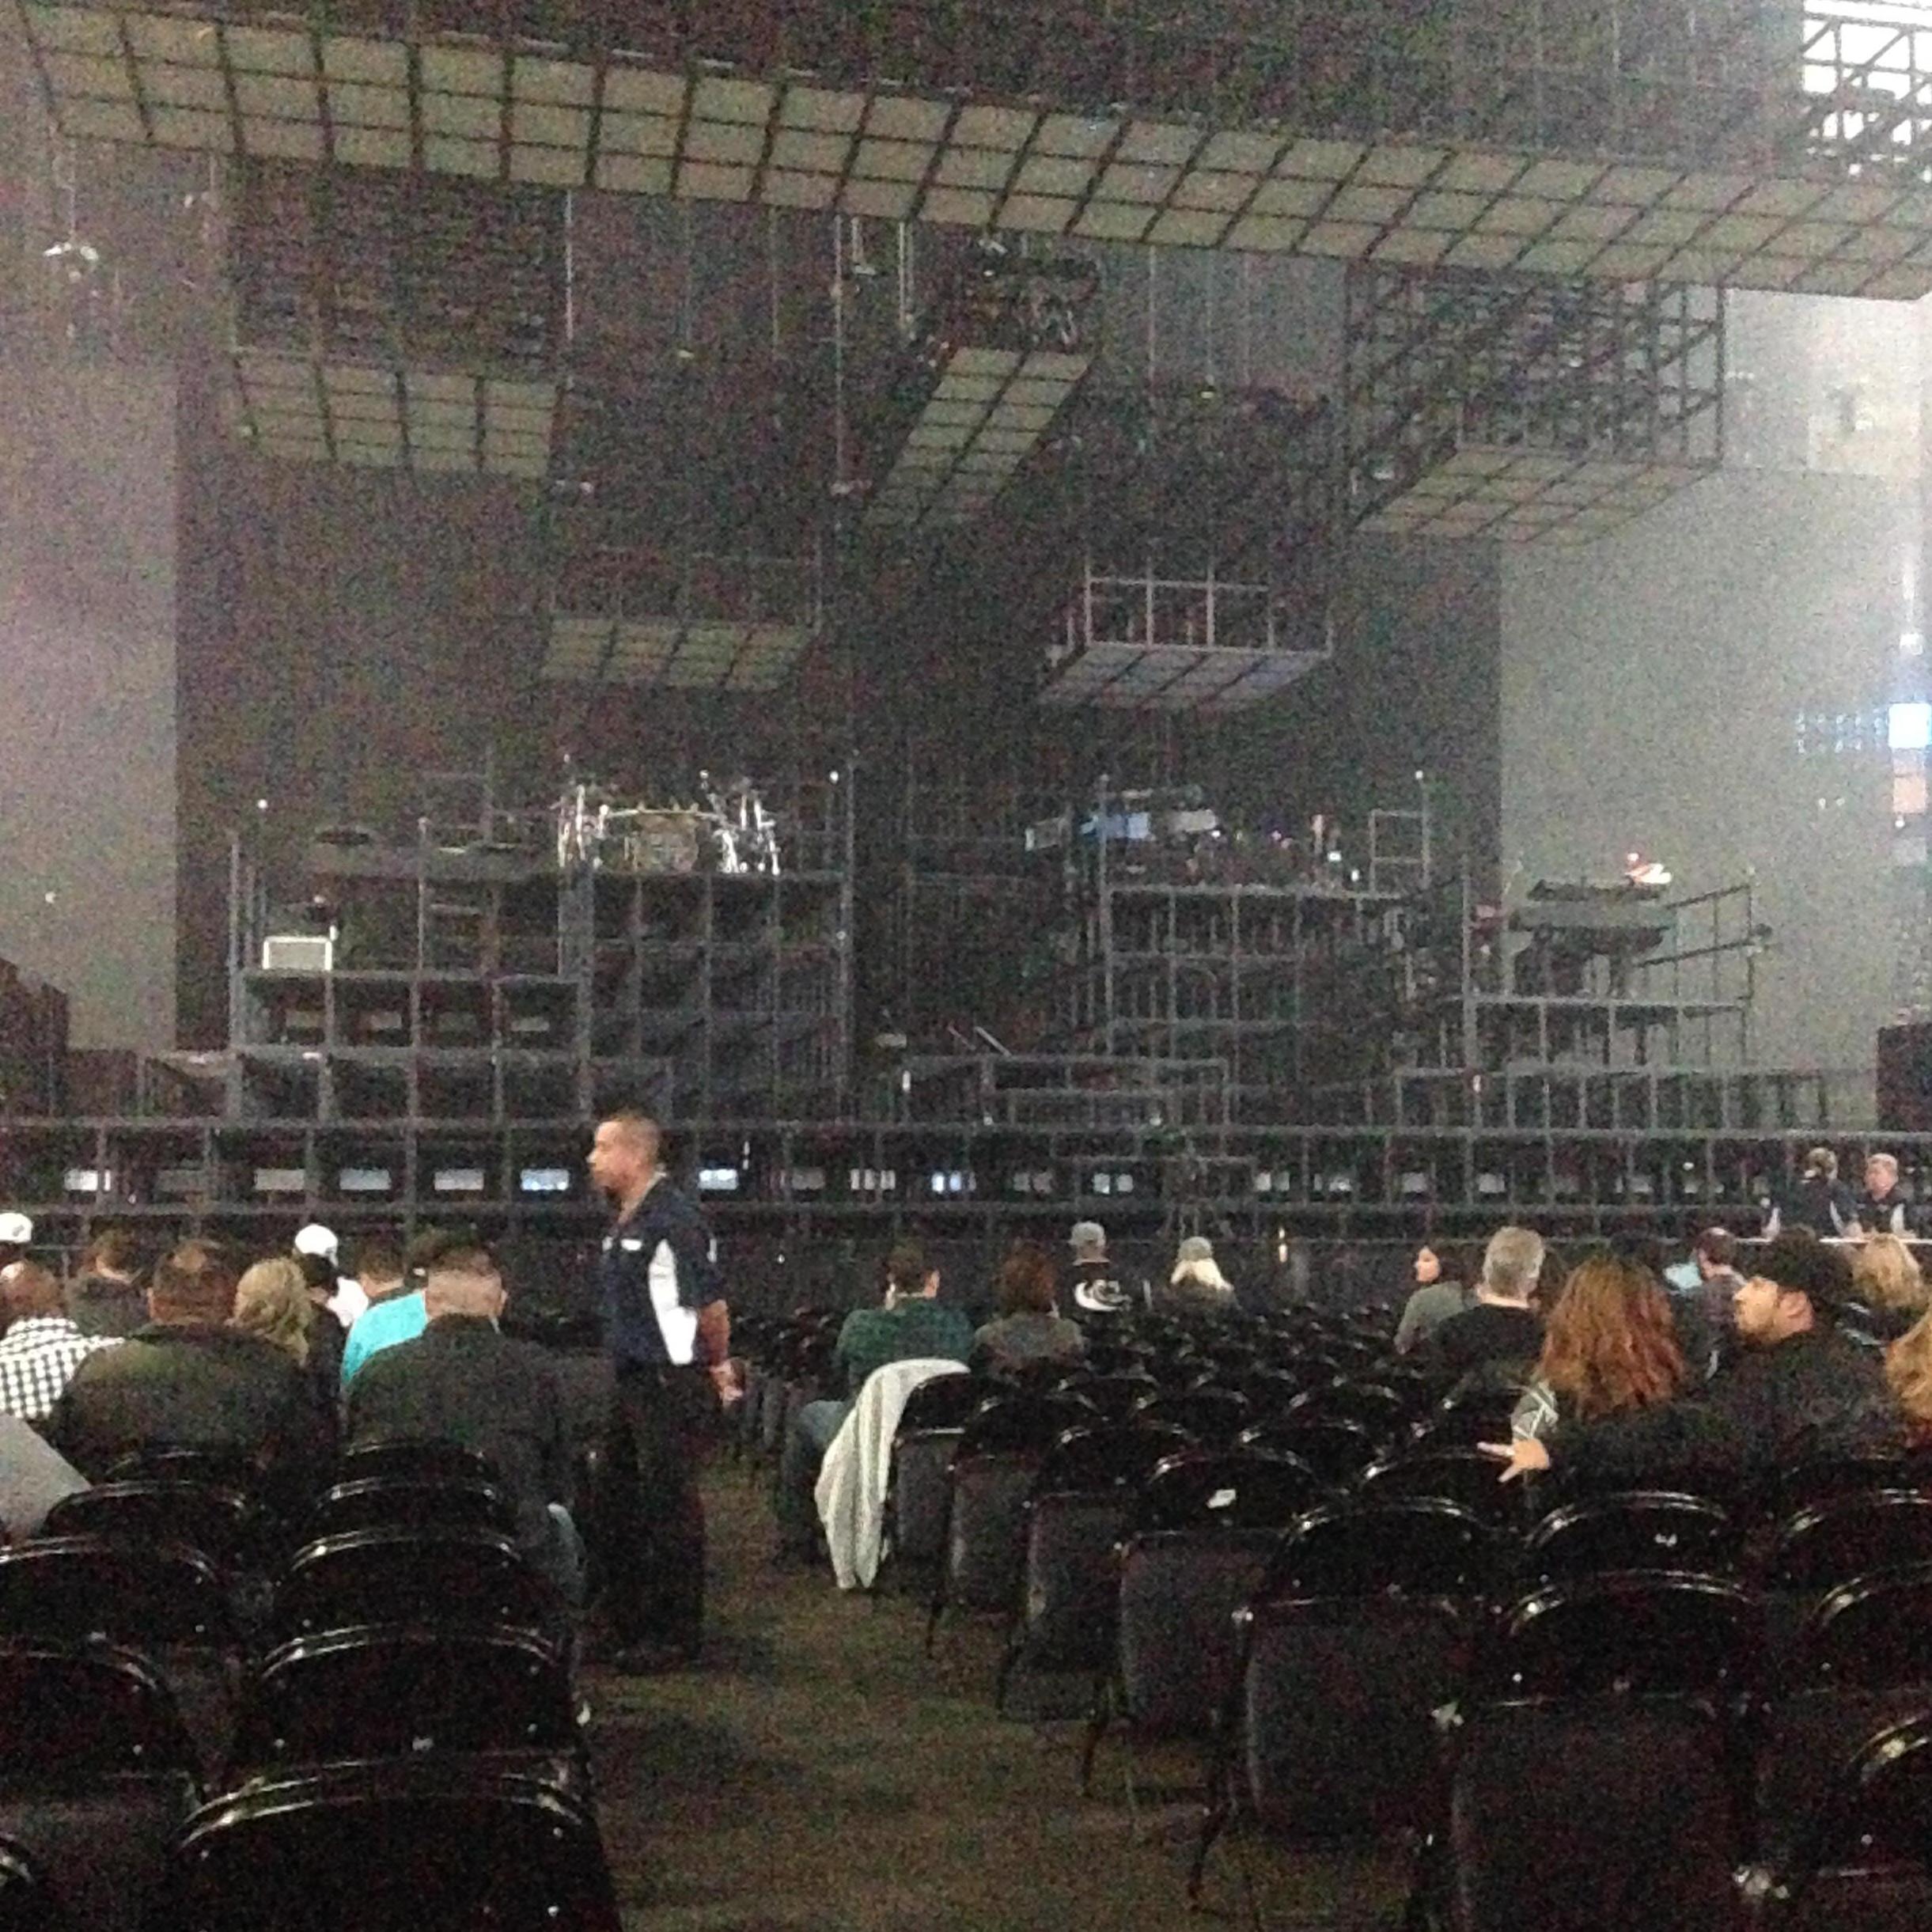 Jay-Z/Watch the Throne Concert (Pepsi Center)